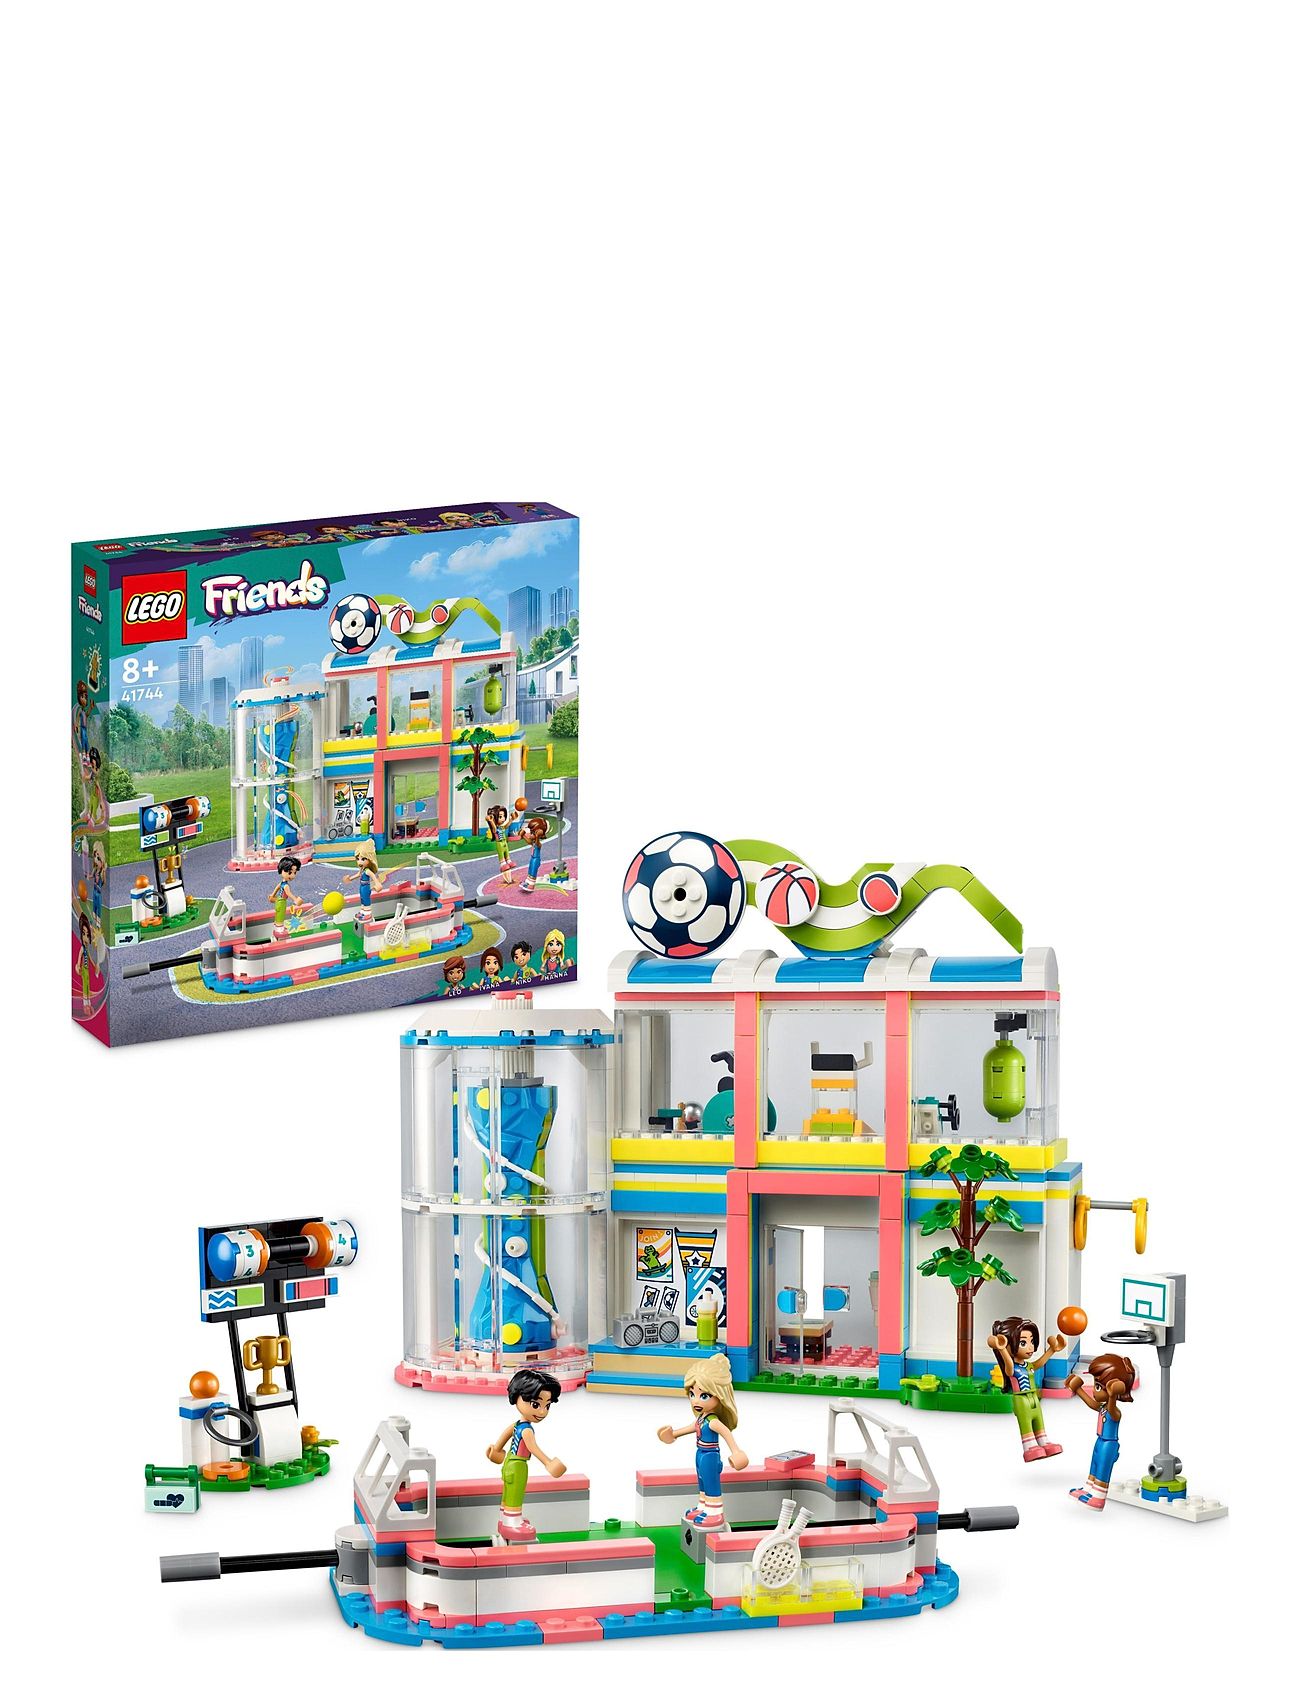 Sports Centre Set With 3 Games To Play Toys Lego Toys Lego friends Multi/patterned LEGO